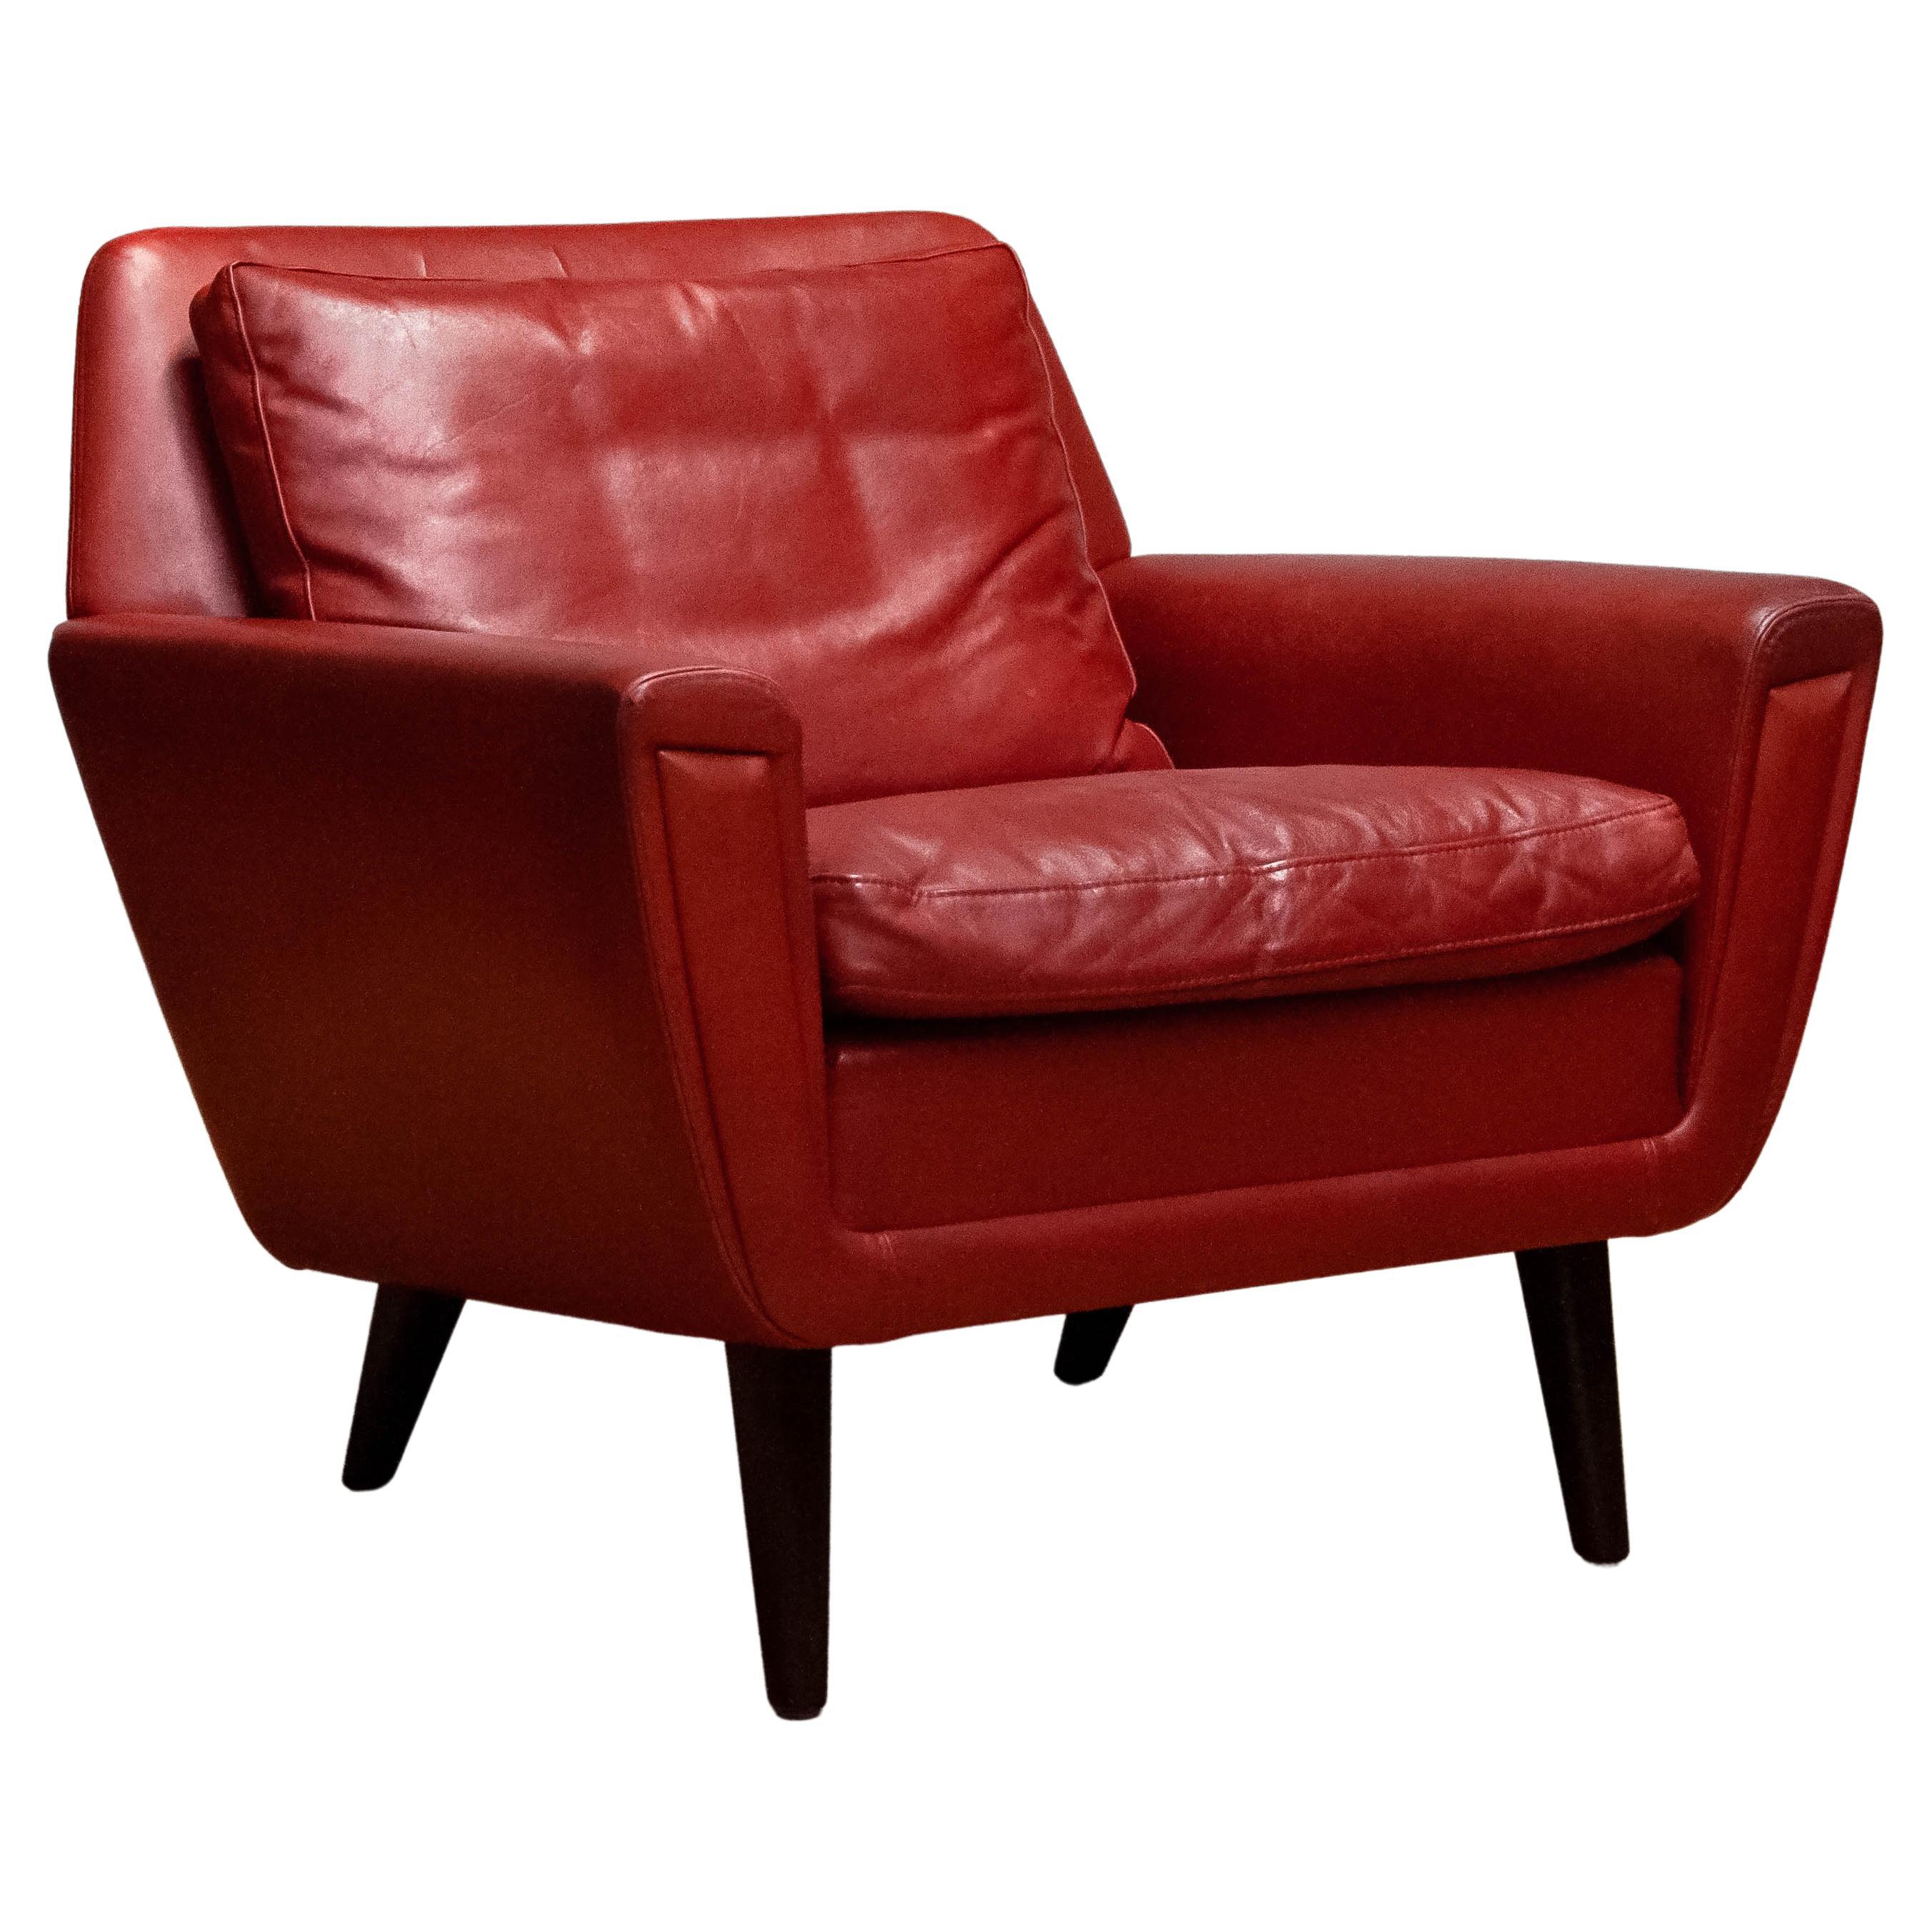 1960s Original Danish Lounge Easy Chair in Red Leather  For Sale